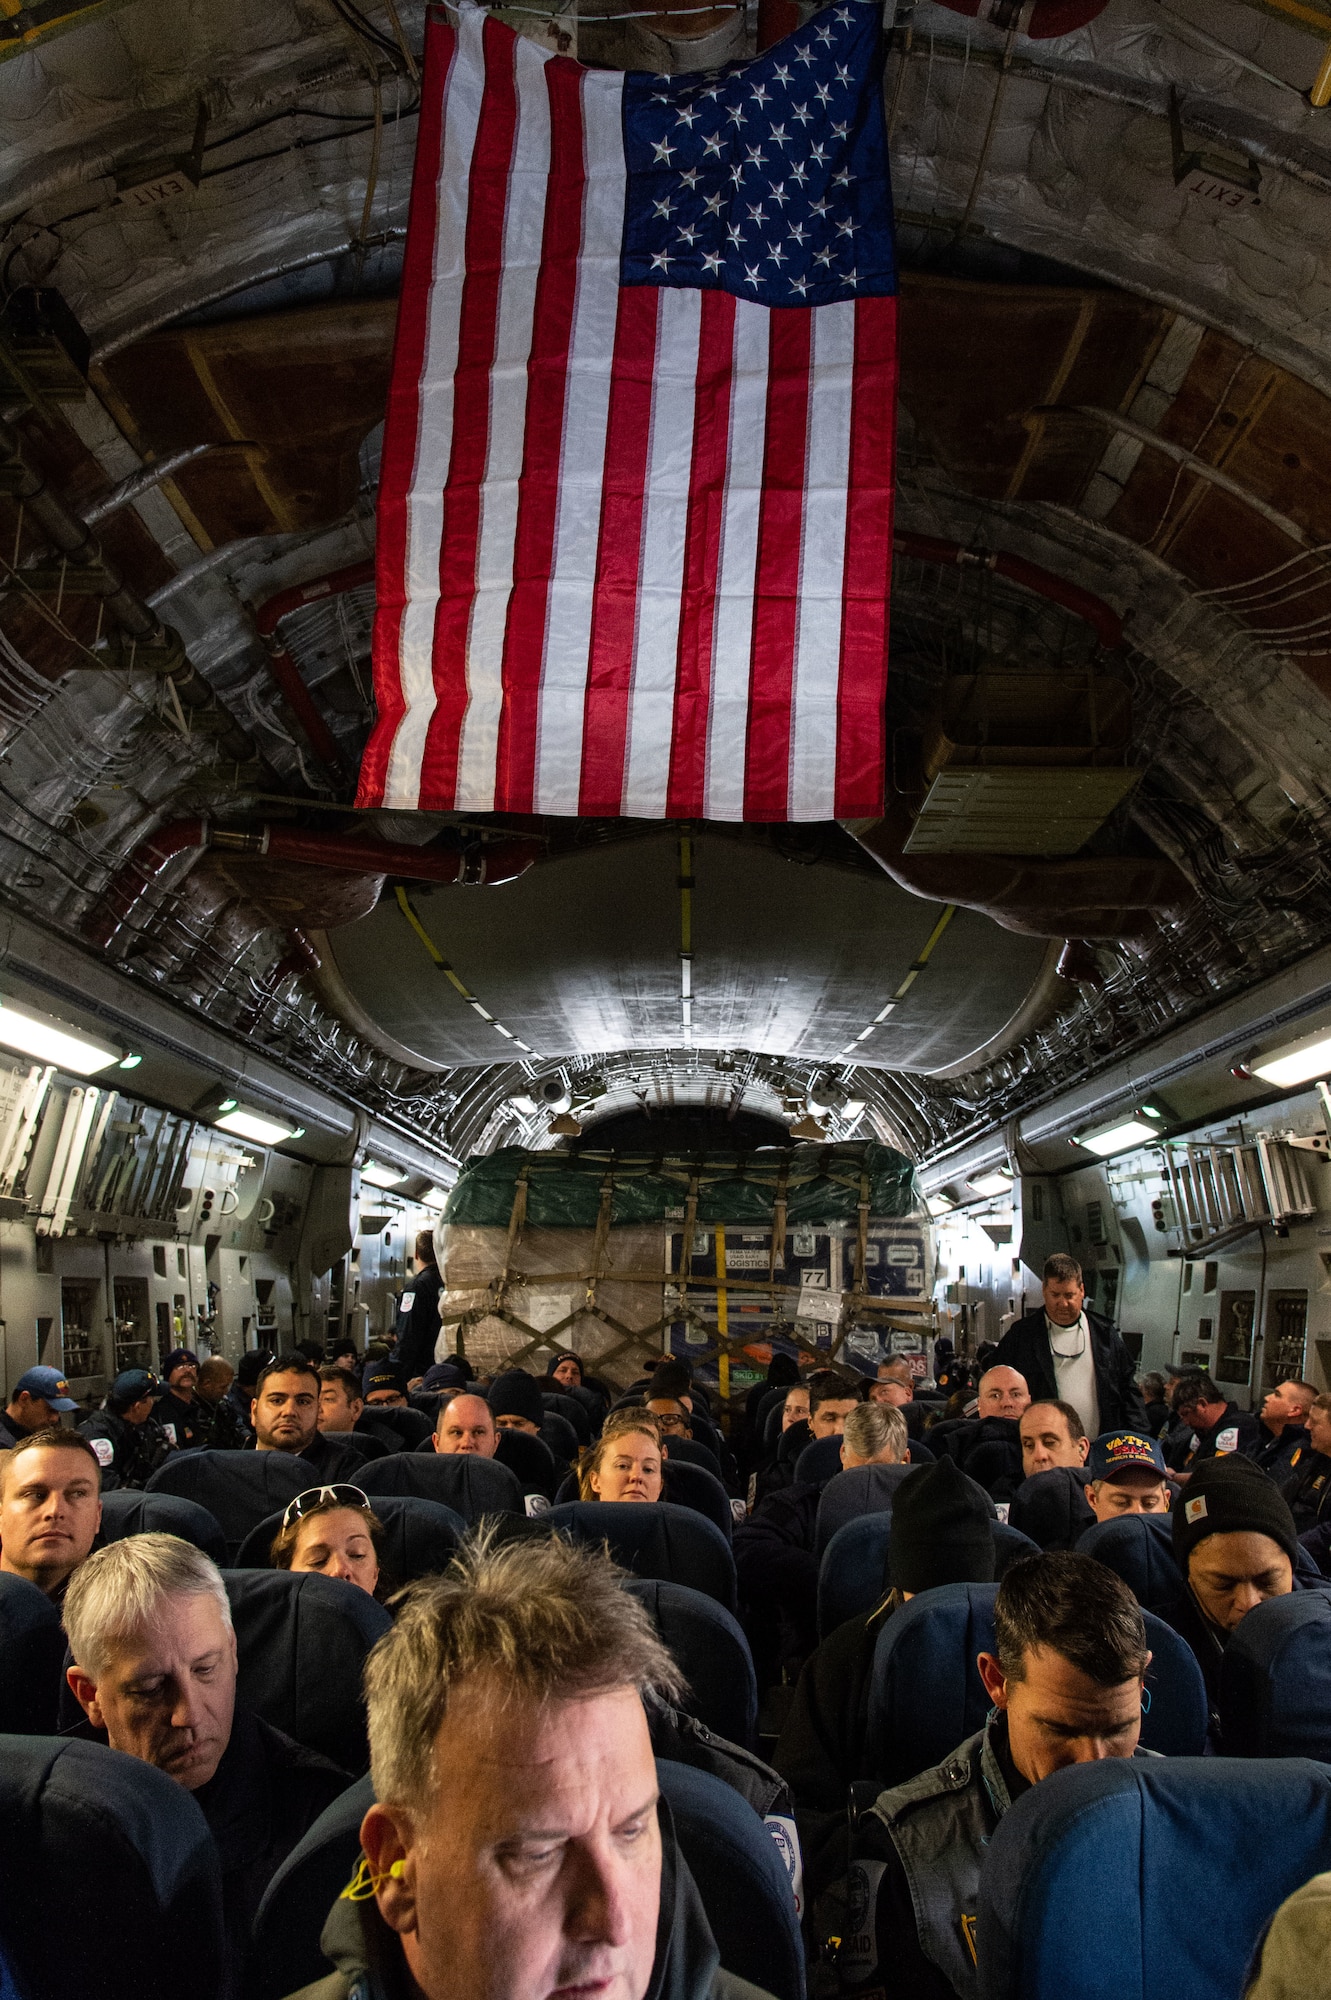 Members of Urban Search and Rescue Virginia Task Force 1, Fairfax County, Virginia, sit onboard a C-17 Globemaster III prior to departing Dover Air Force Base, Delaware, Feb. 7, 2023. The U.S. Agency for International Development (USAID) is mobilizing emergency humanitarian assistance to respond to the devastating impacts in Türkiye following the worst earthquake to hit the region in almost a century. (U.S. Air Force photo by Roland Balik)